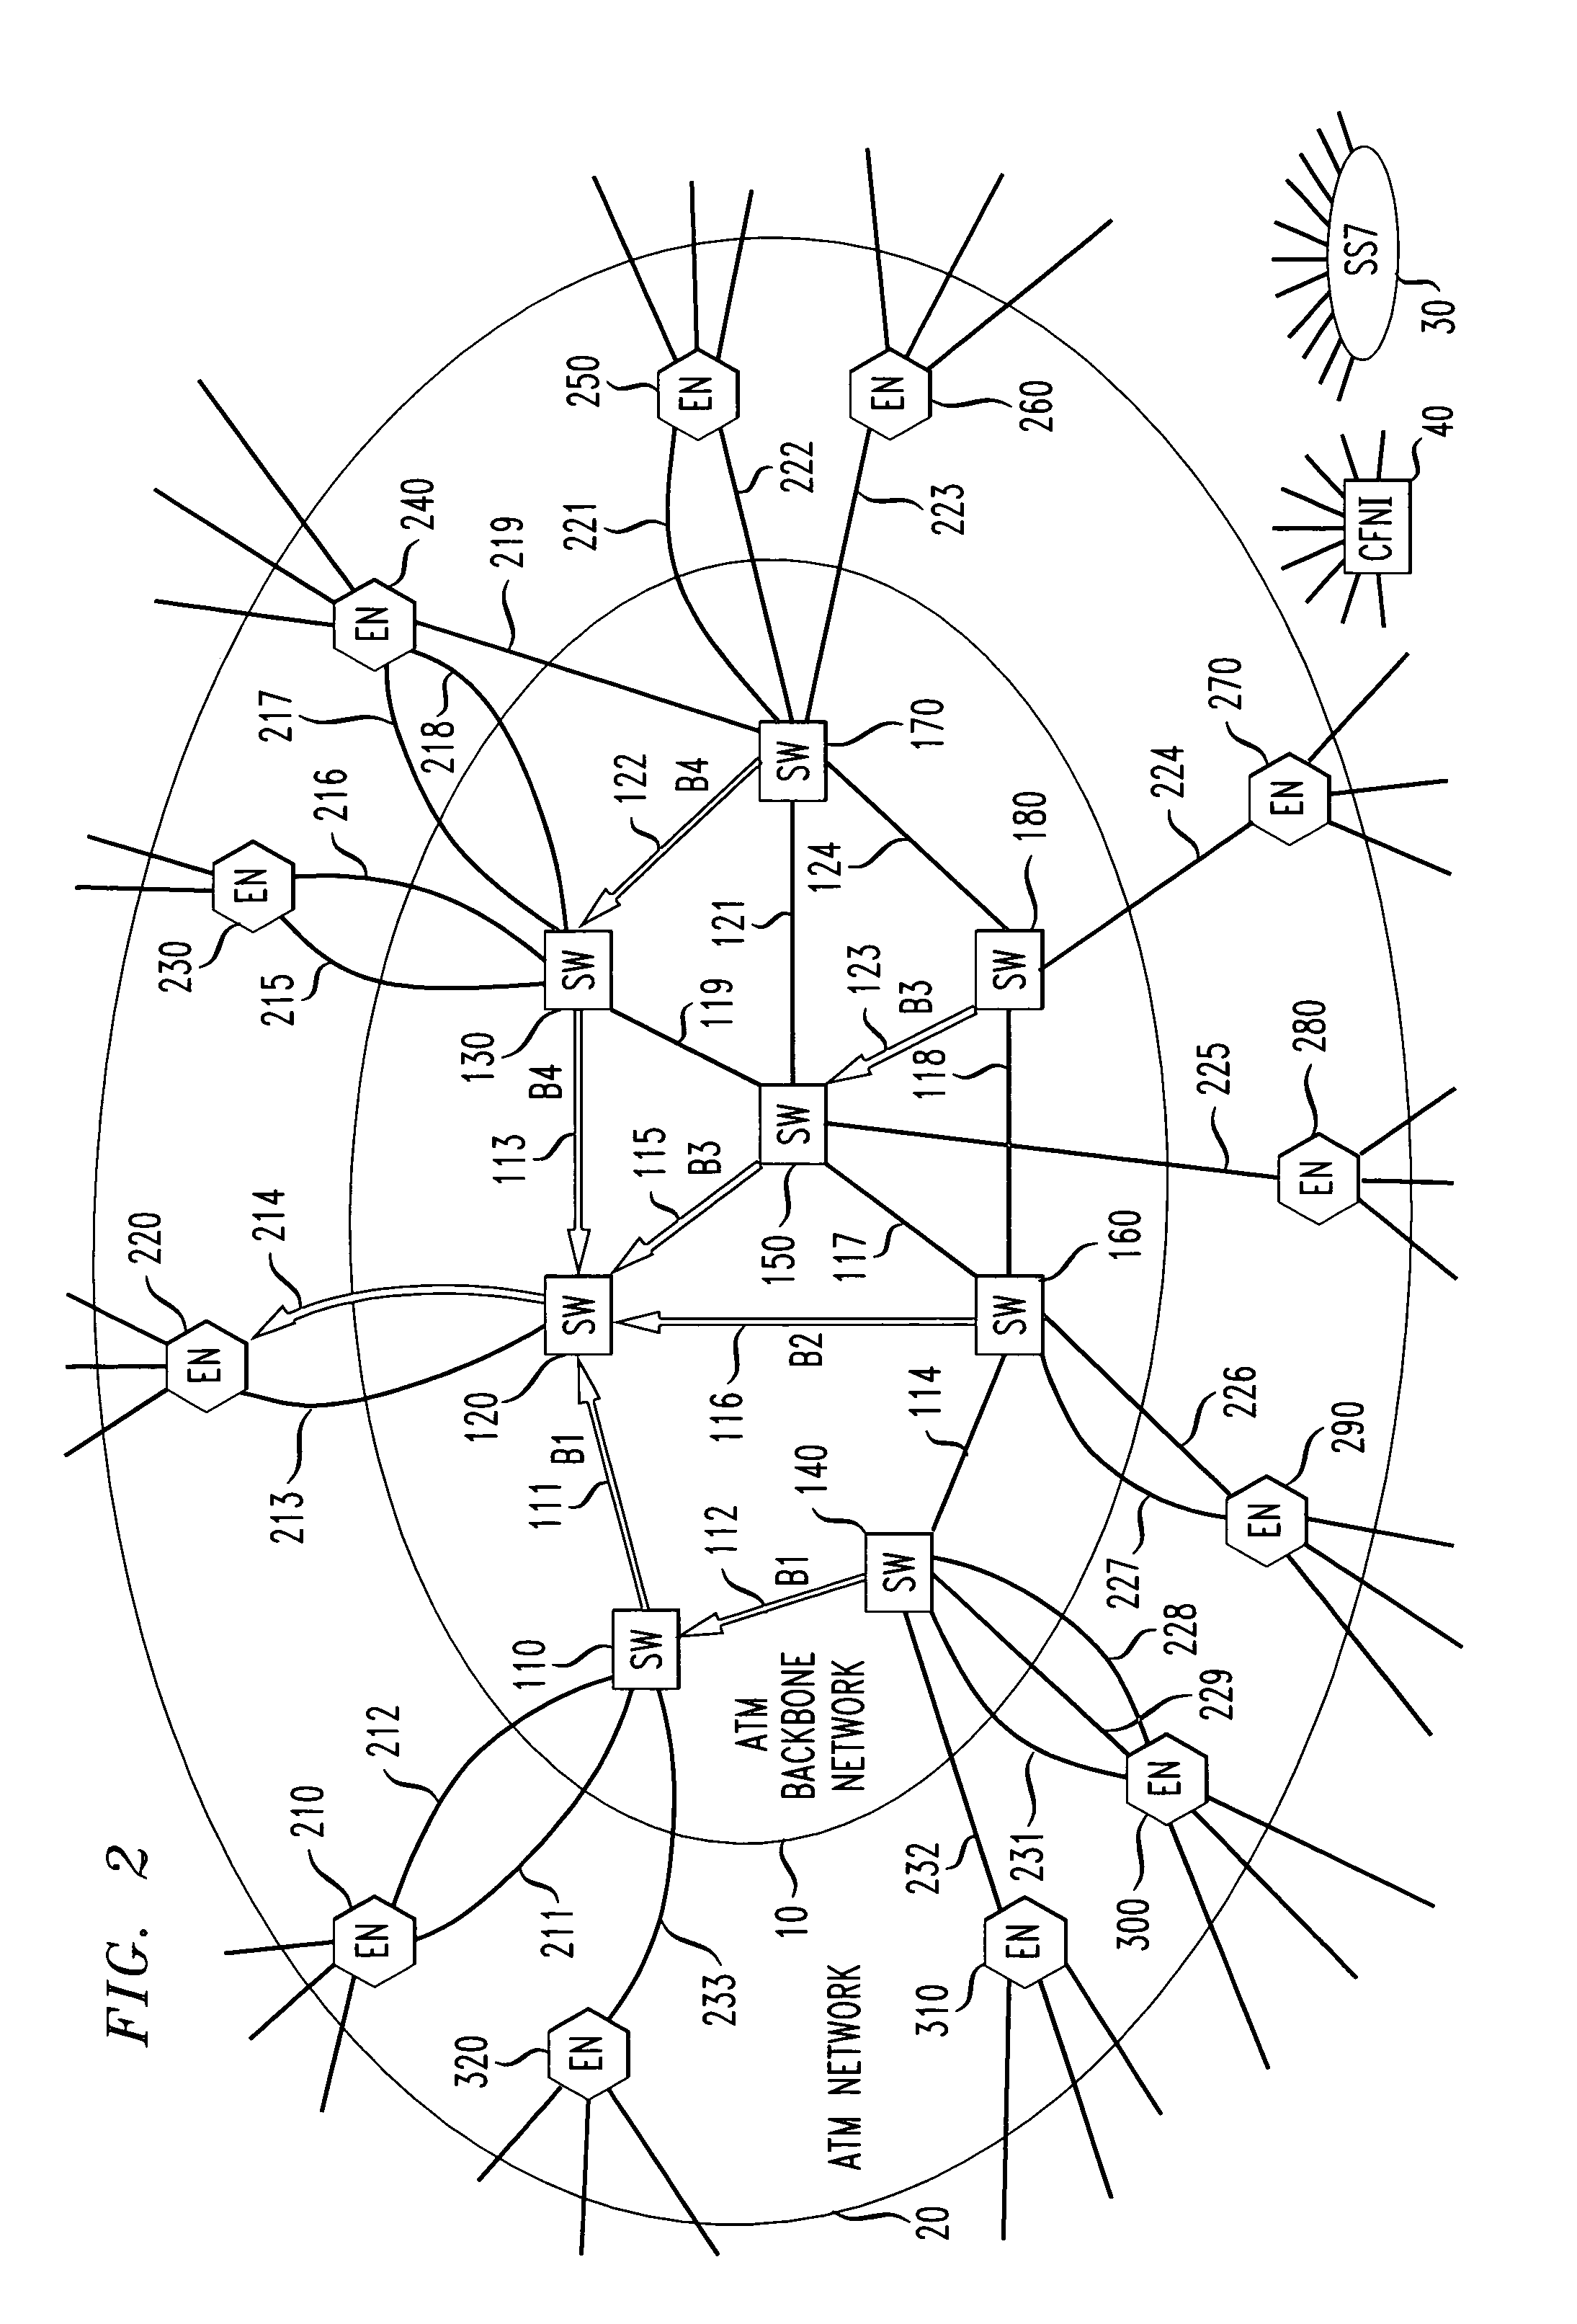 Integrated switching and facility networks